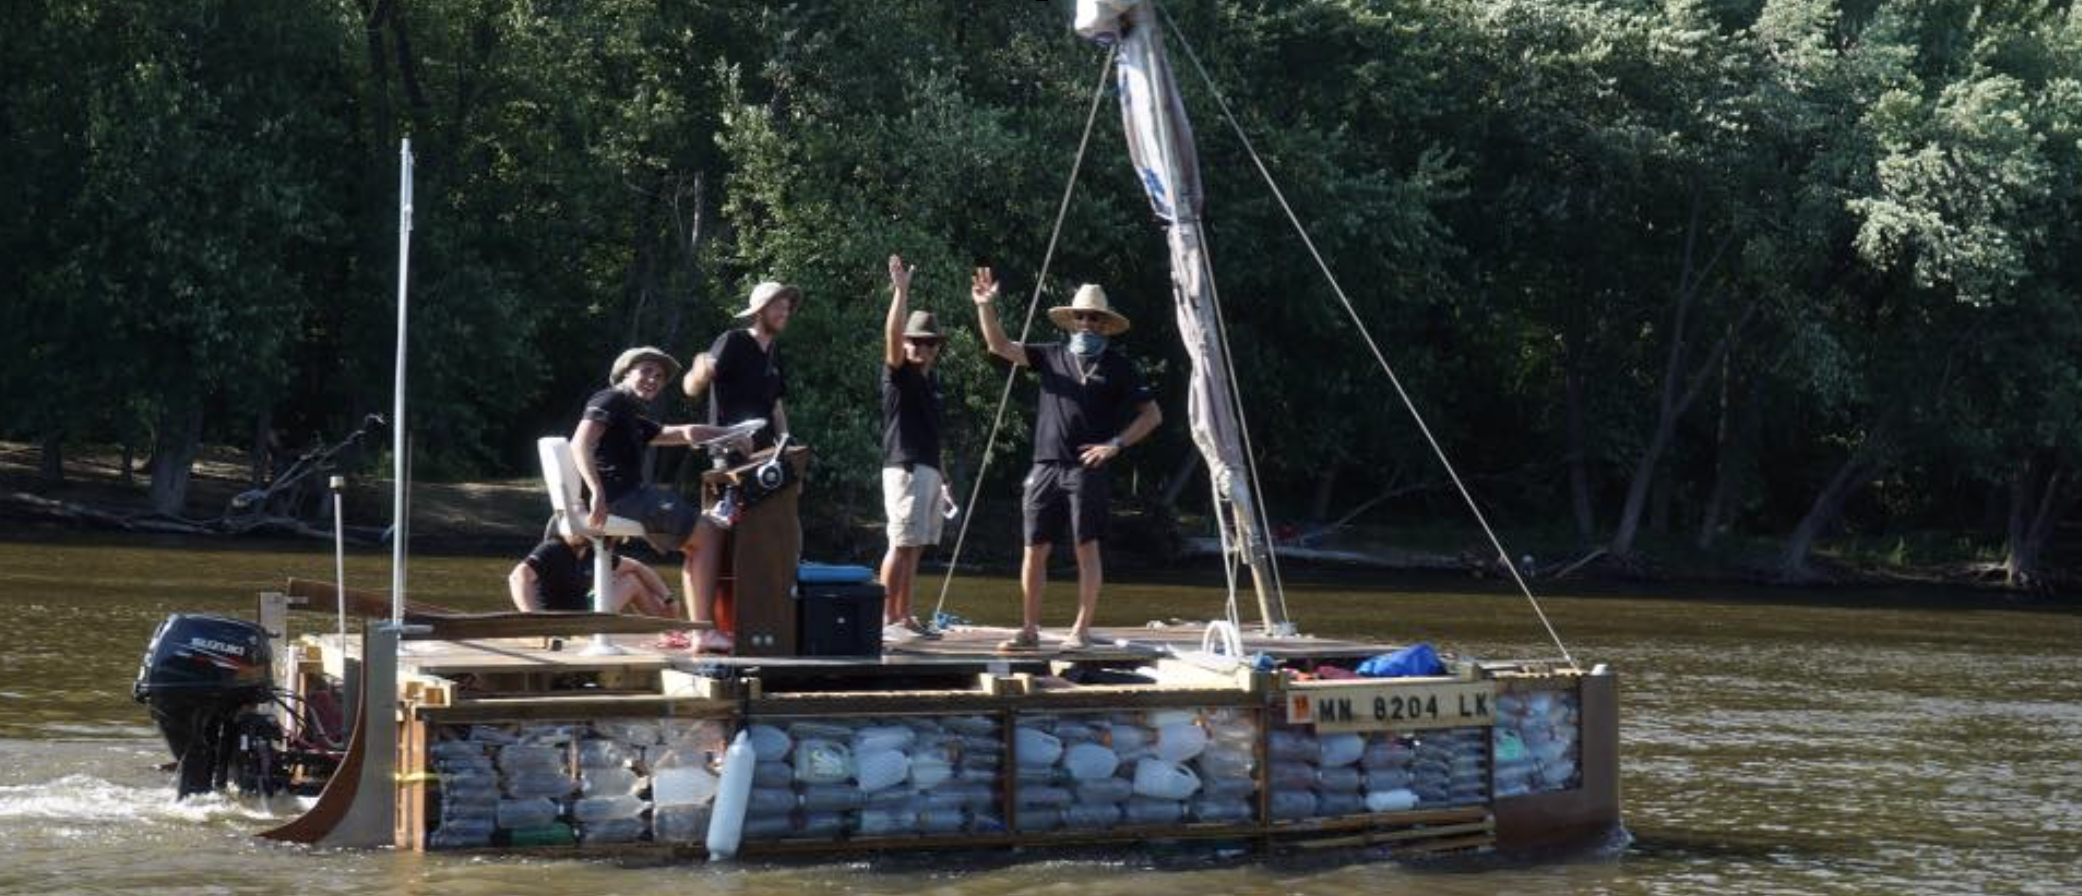 Recycled Mississippi - Sailing down the Mississippi River on 800 plastic bottles